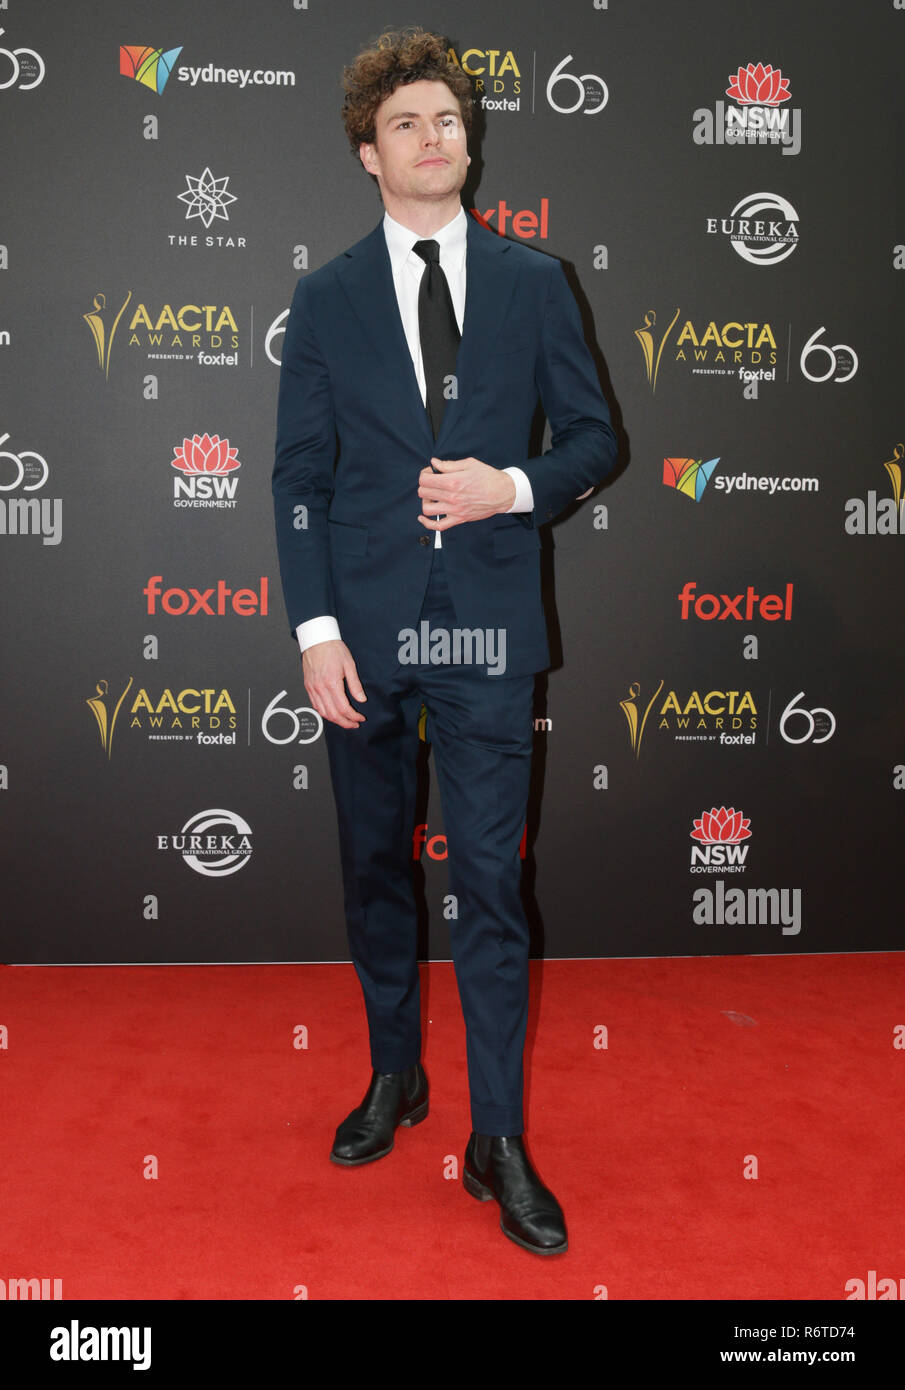 Sydney, NSW, Australia. 5th Dec, 2018. Vance Joy seen on the red carpet during the 60th AACTA Awards in Sydney. Credit: Belinda Vel/SOPA Images/ZUMA Wire/Alamy Live News Stock Photo